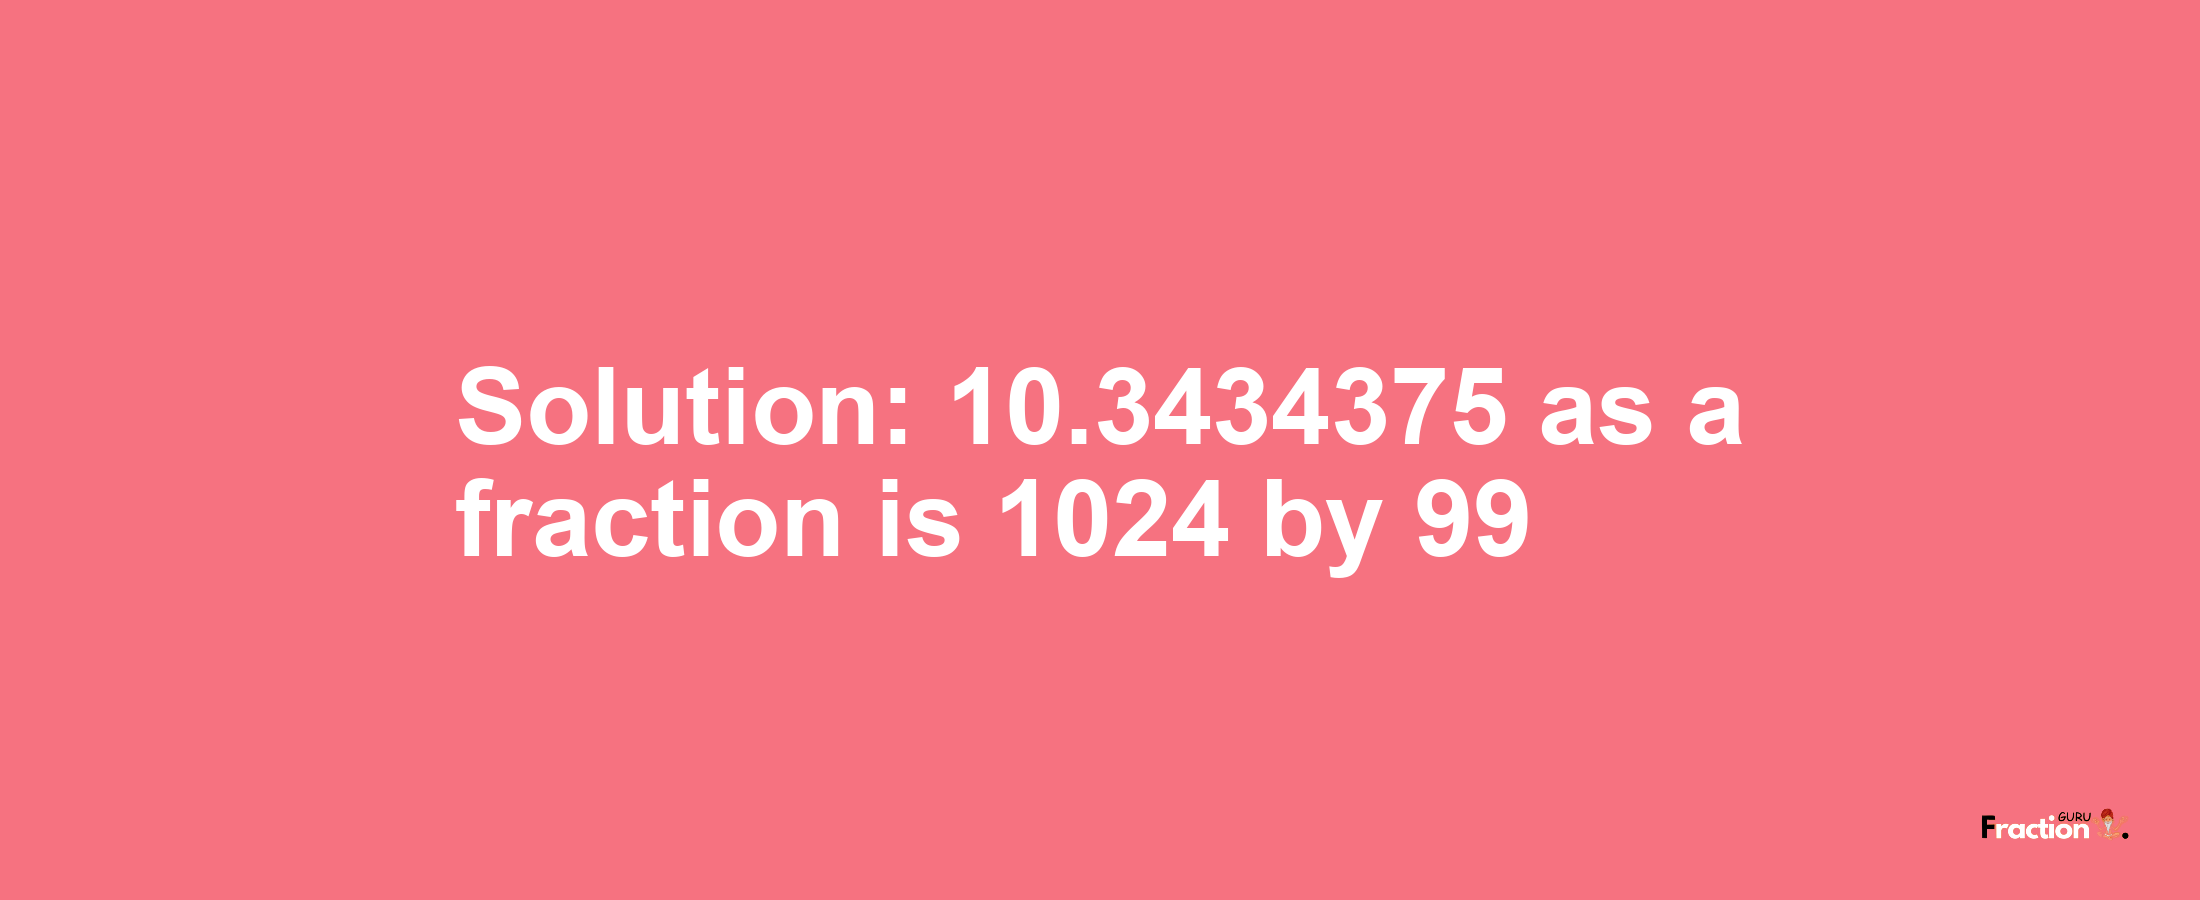 Solution:10.3434375 as a fraction is 1024/99